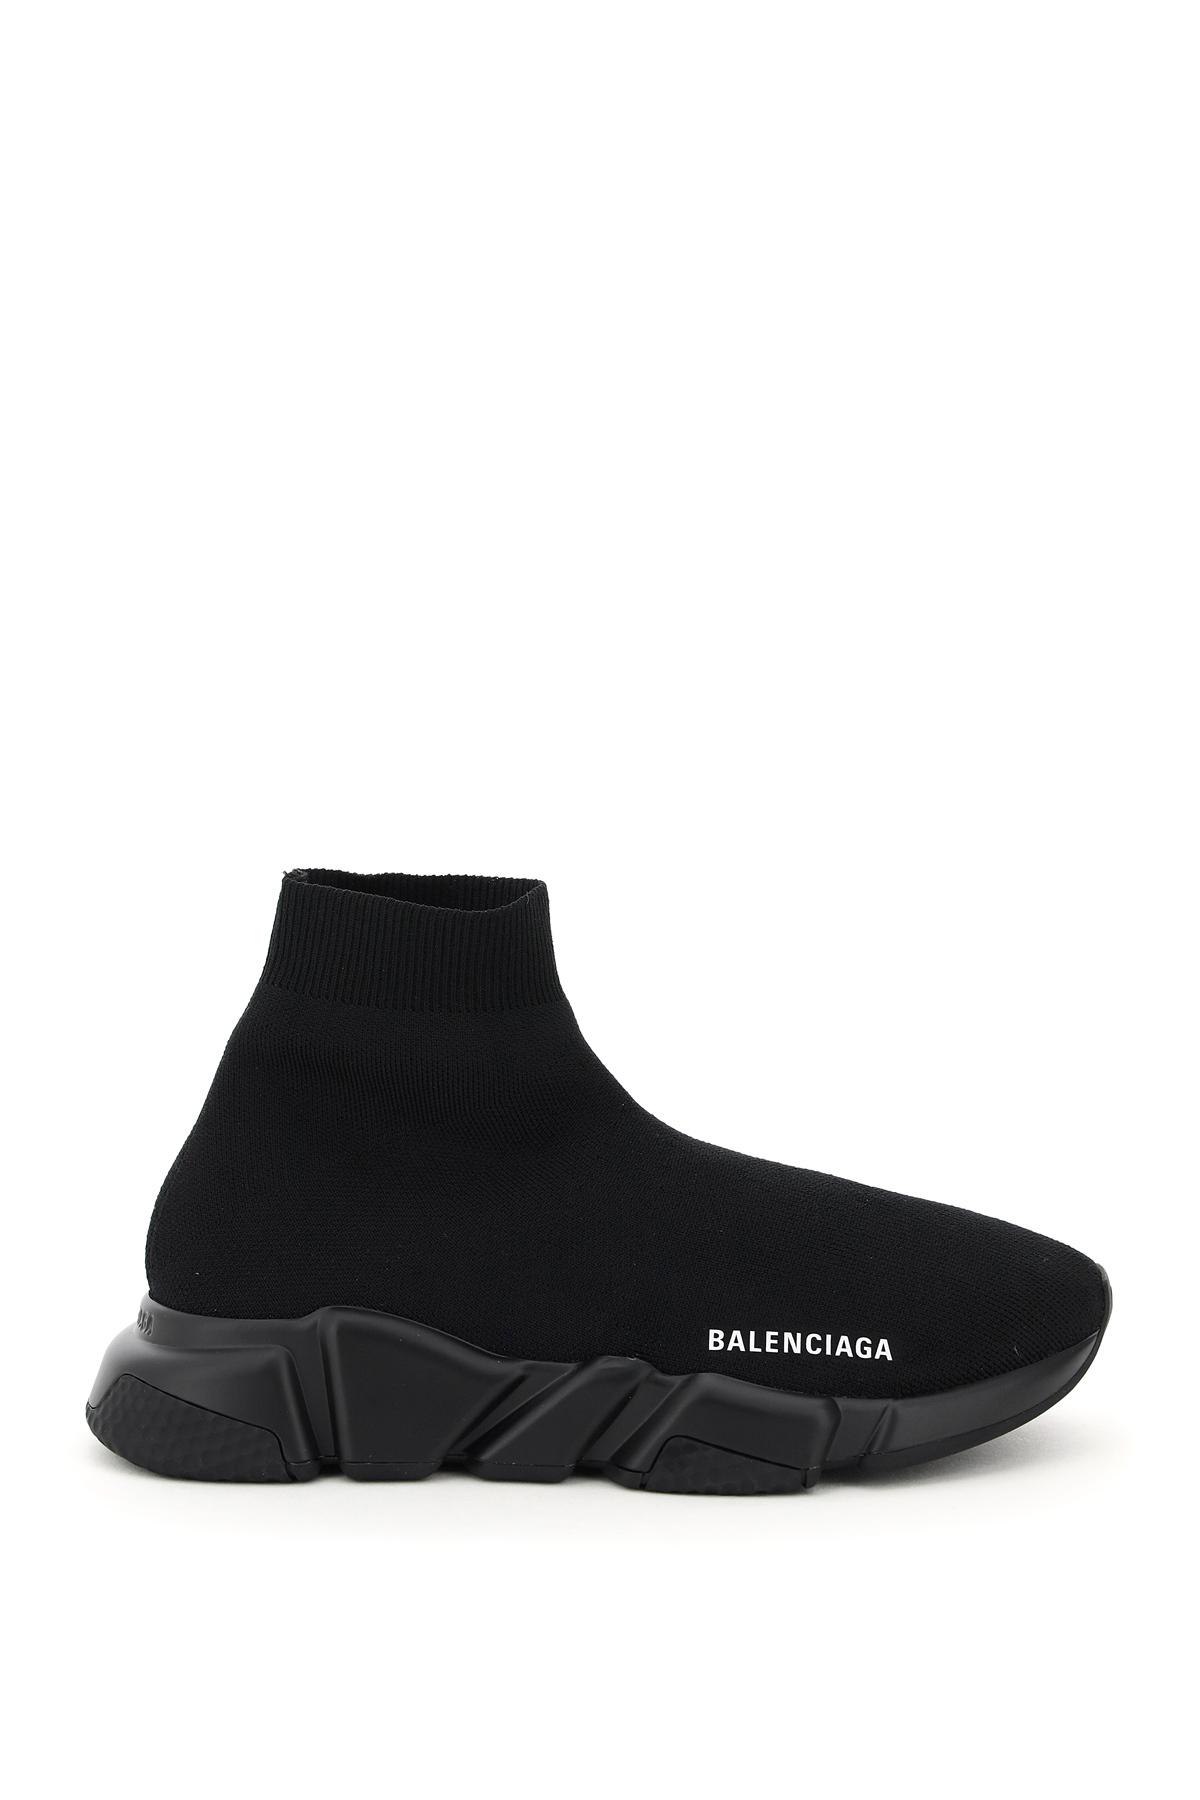 BALENCIAGA STRETCH KNIT SPEED SNEAKERS